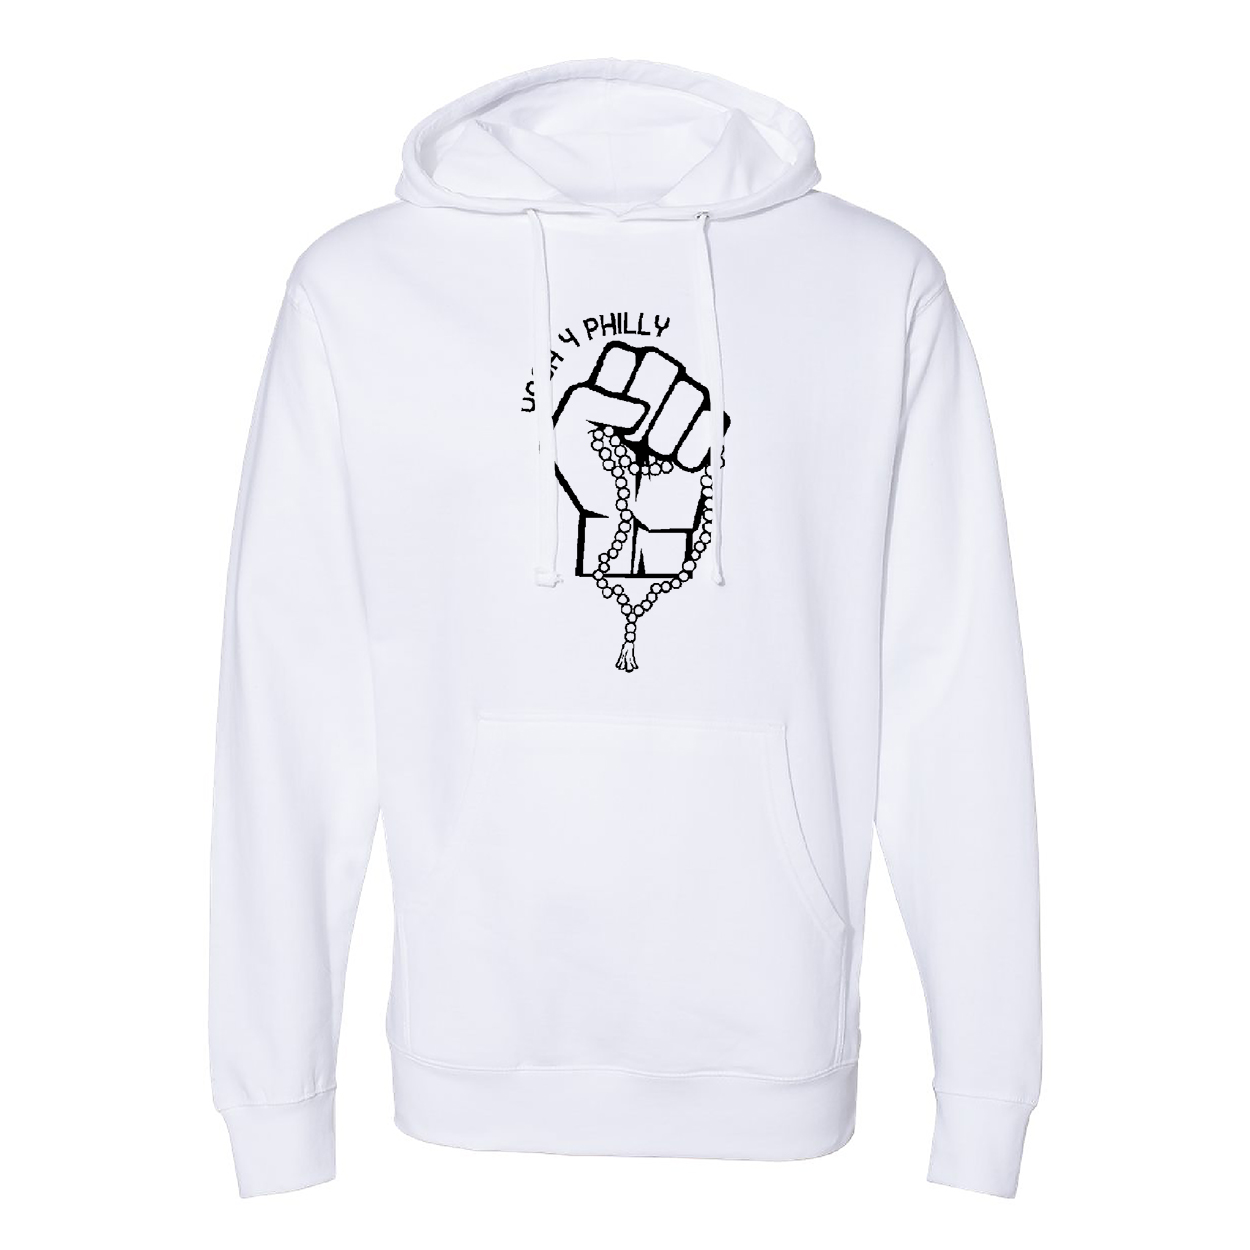 Yoga 4 philly white hoodie